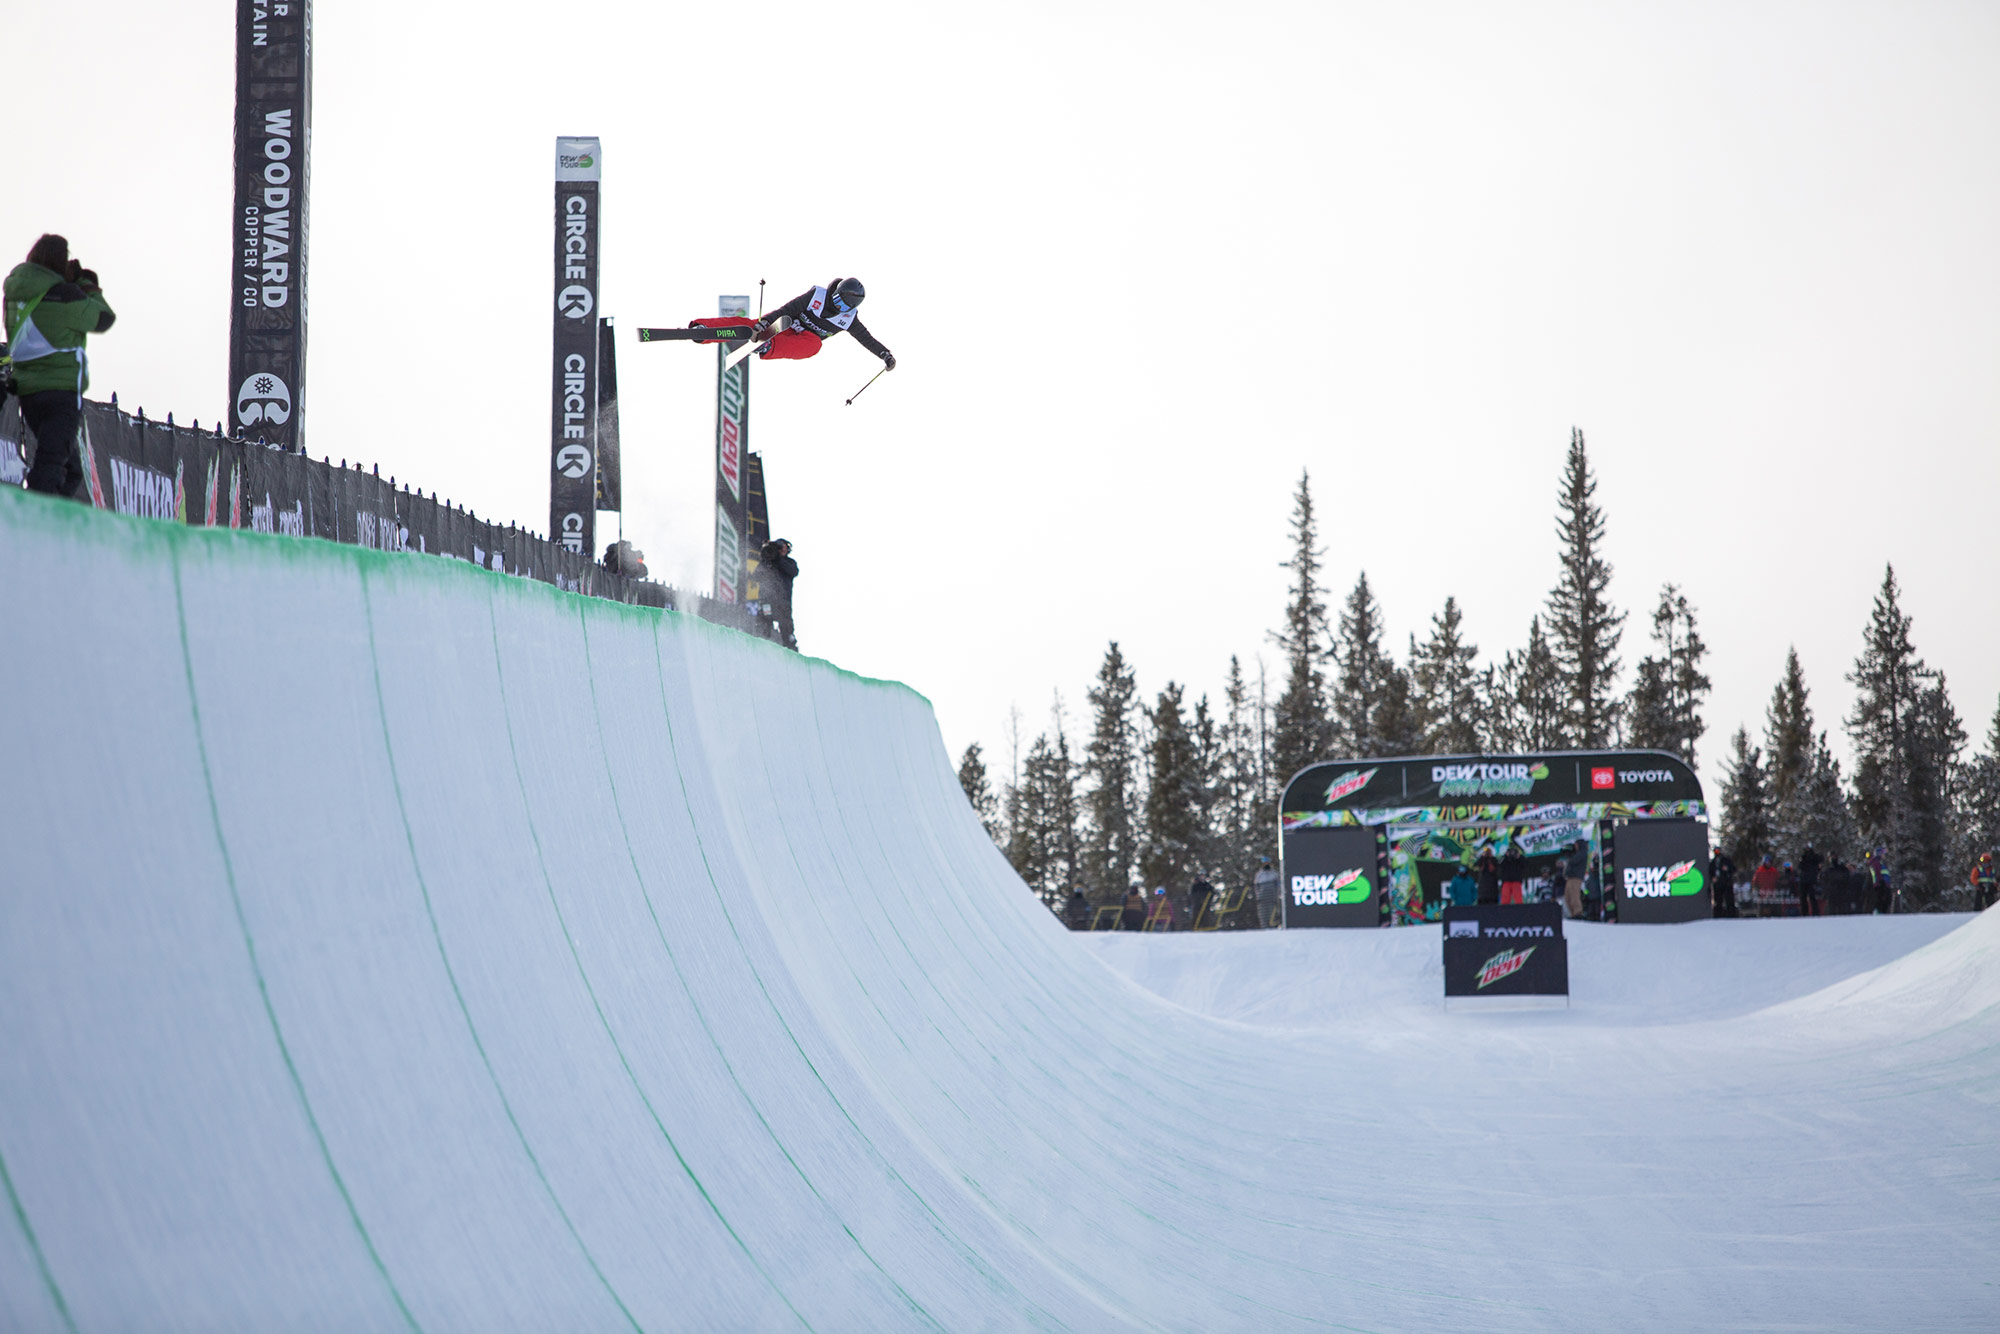 Kexin Zhang competes in the women's halfpipe finals at the 2021 Winter Dew Tour in Copper Mountain, Colorado.